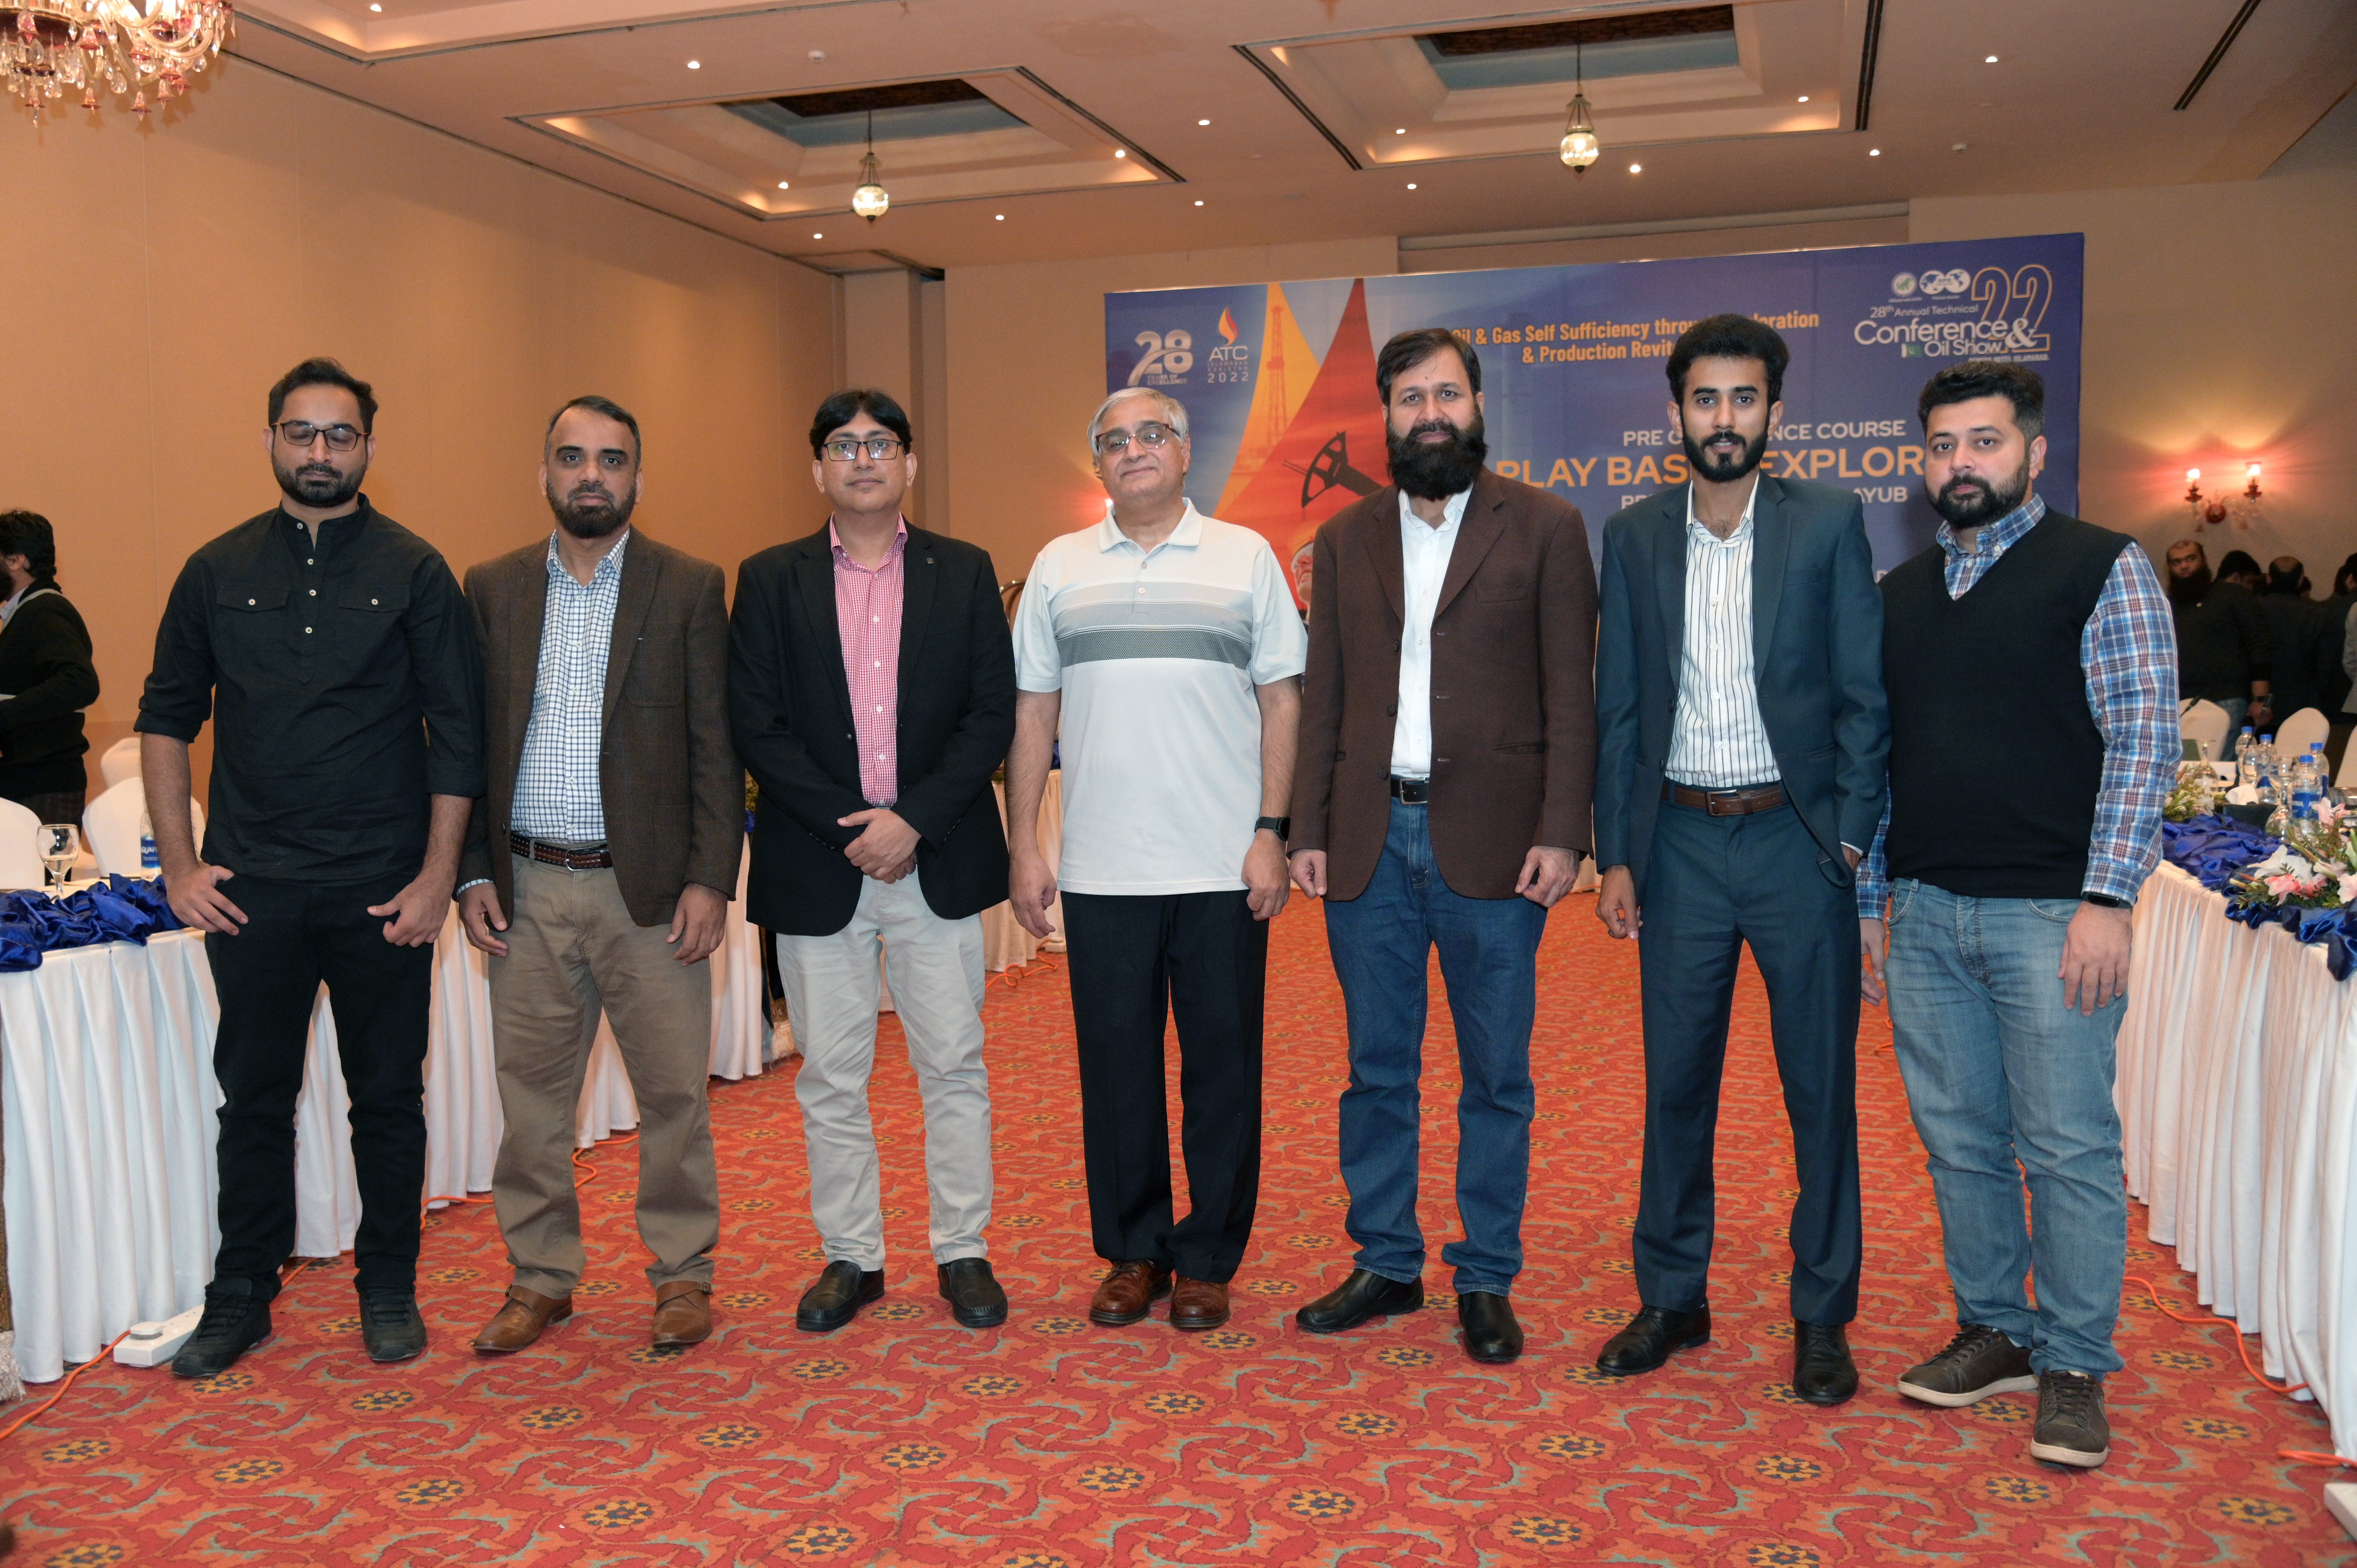 A group photo of participants in Sarena hotel on the event of 28th annual technical conference and oil show